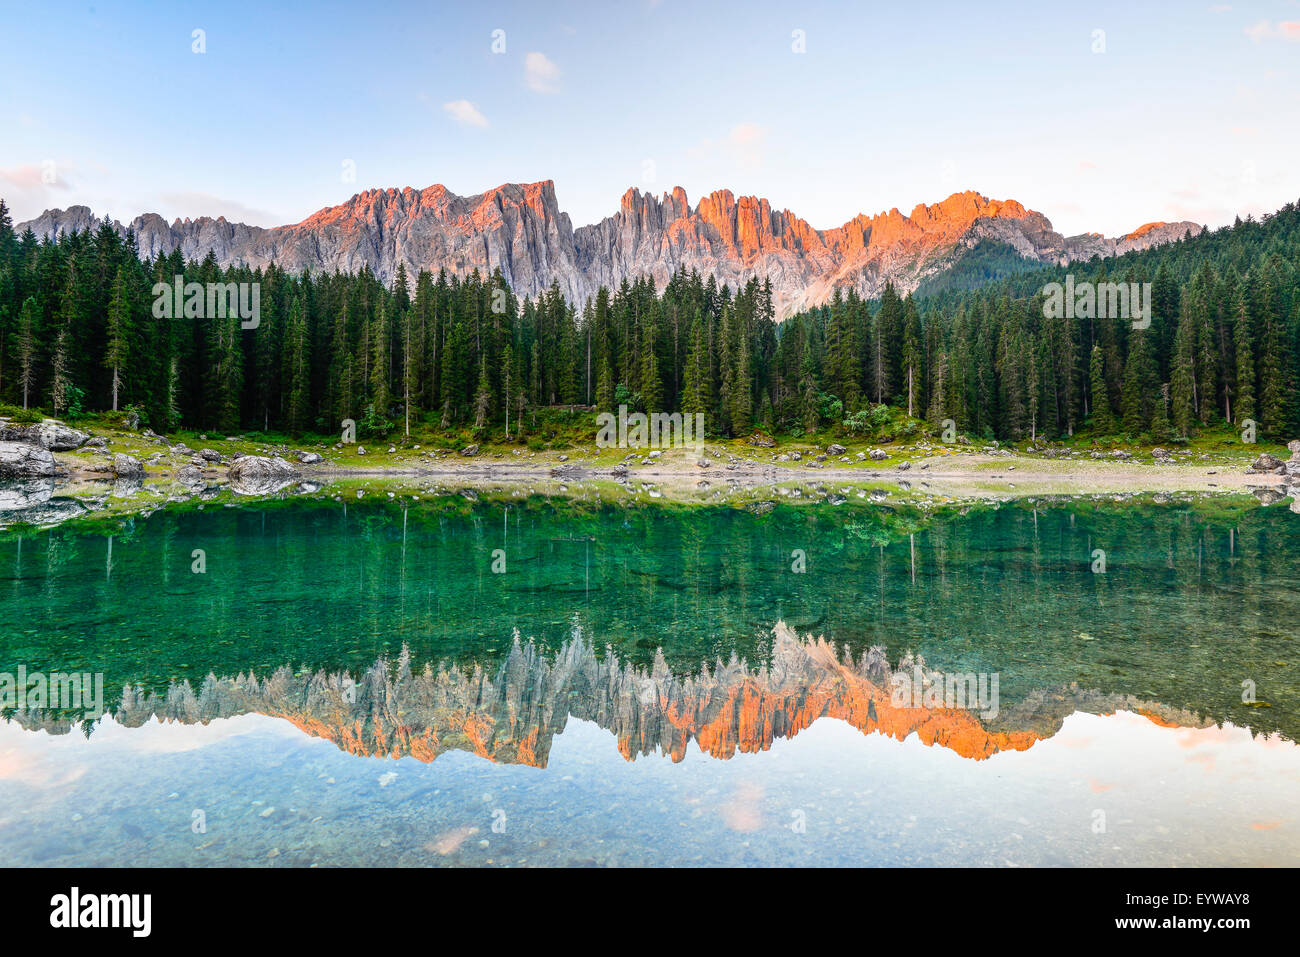 Karersee lake in front of Latemar, Lago di Carezza, Carezza, Dolomites, Trentino Province, Province of South Tyrol, Italy Stock Photo